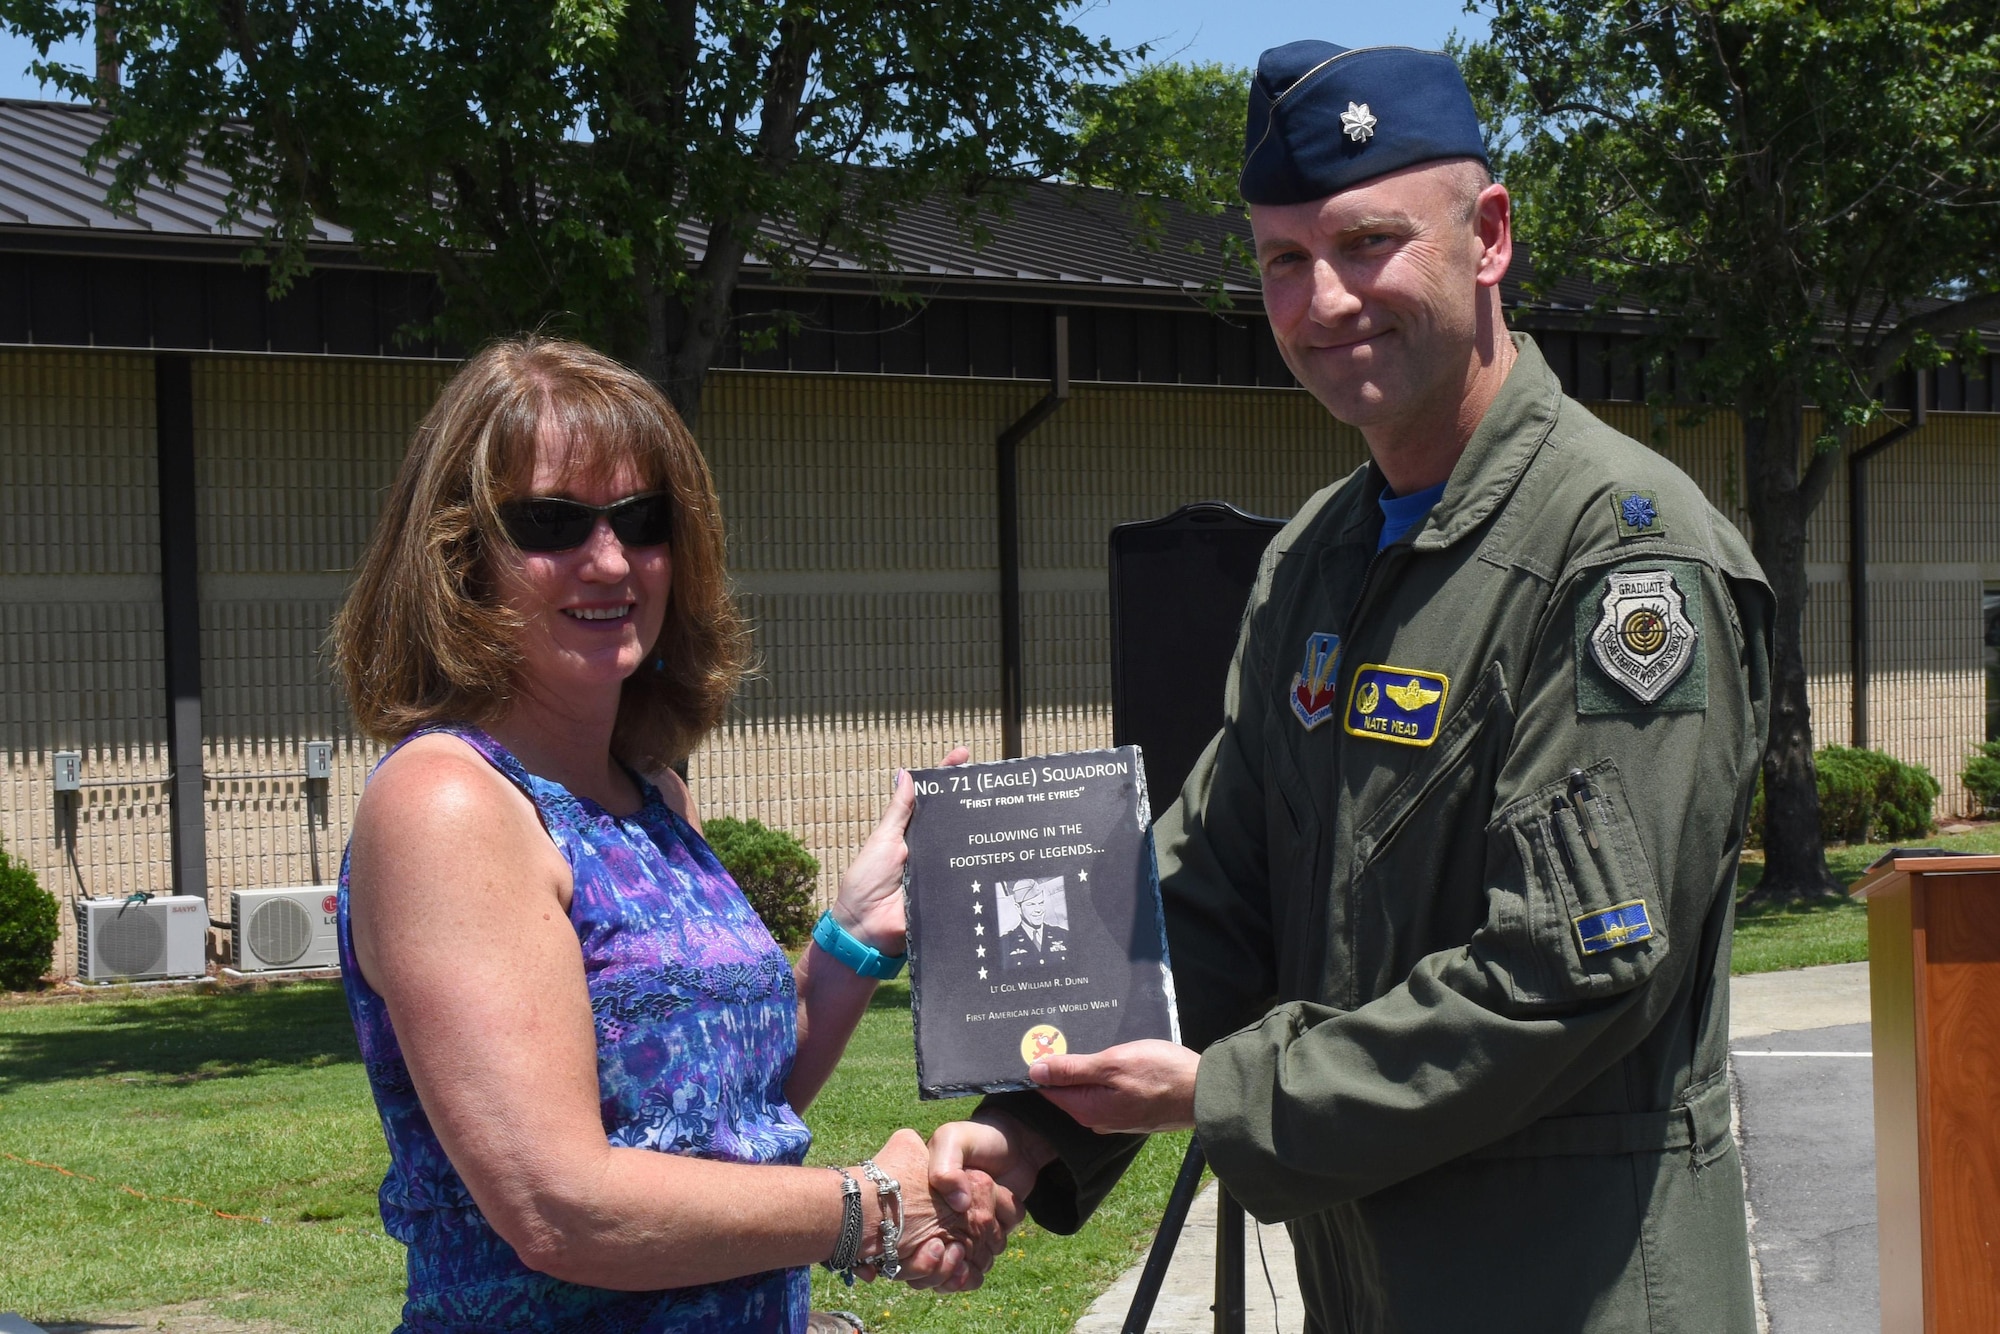 Lt. Col. Nathan Mead, 334th Fighter Squadron commander, presents a plaque to Felicia Hutto, granddaughter of William Dunn, British Royal Air Force Squadron 71 member and first American ace of World War II, during the unveiling of a memorial dedicated to the RAF members, July 8, 2016, at Seymour Johnson Air Force Base, North Carolina. Family members of the No. 71 (Eagle) Squadron service members came from all over the country to attend the ceremony. (U.S. Air Force photo by Airman 1st Class Ashley Williamson)